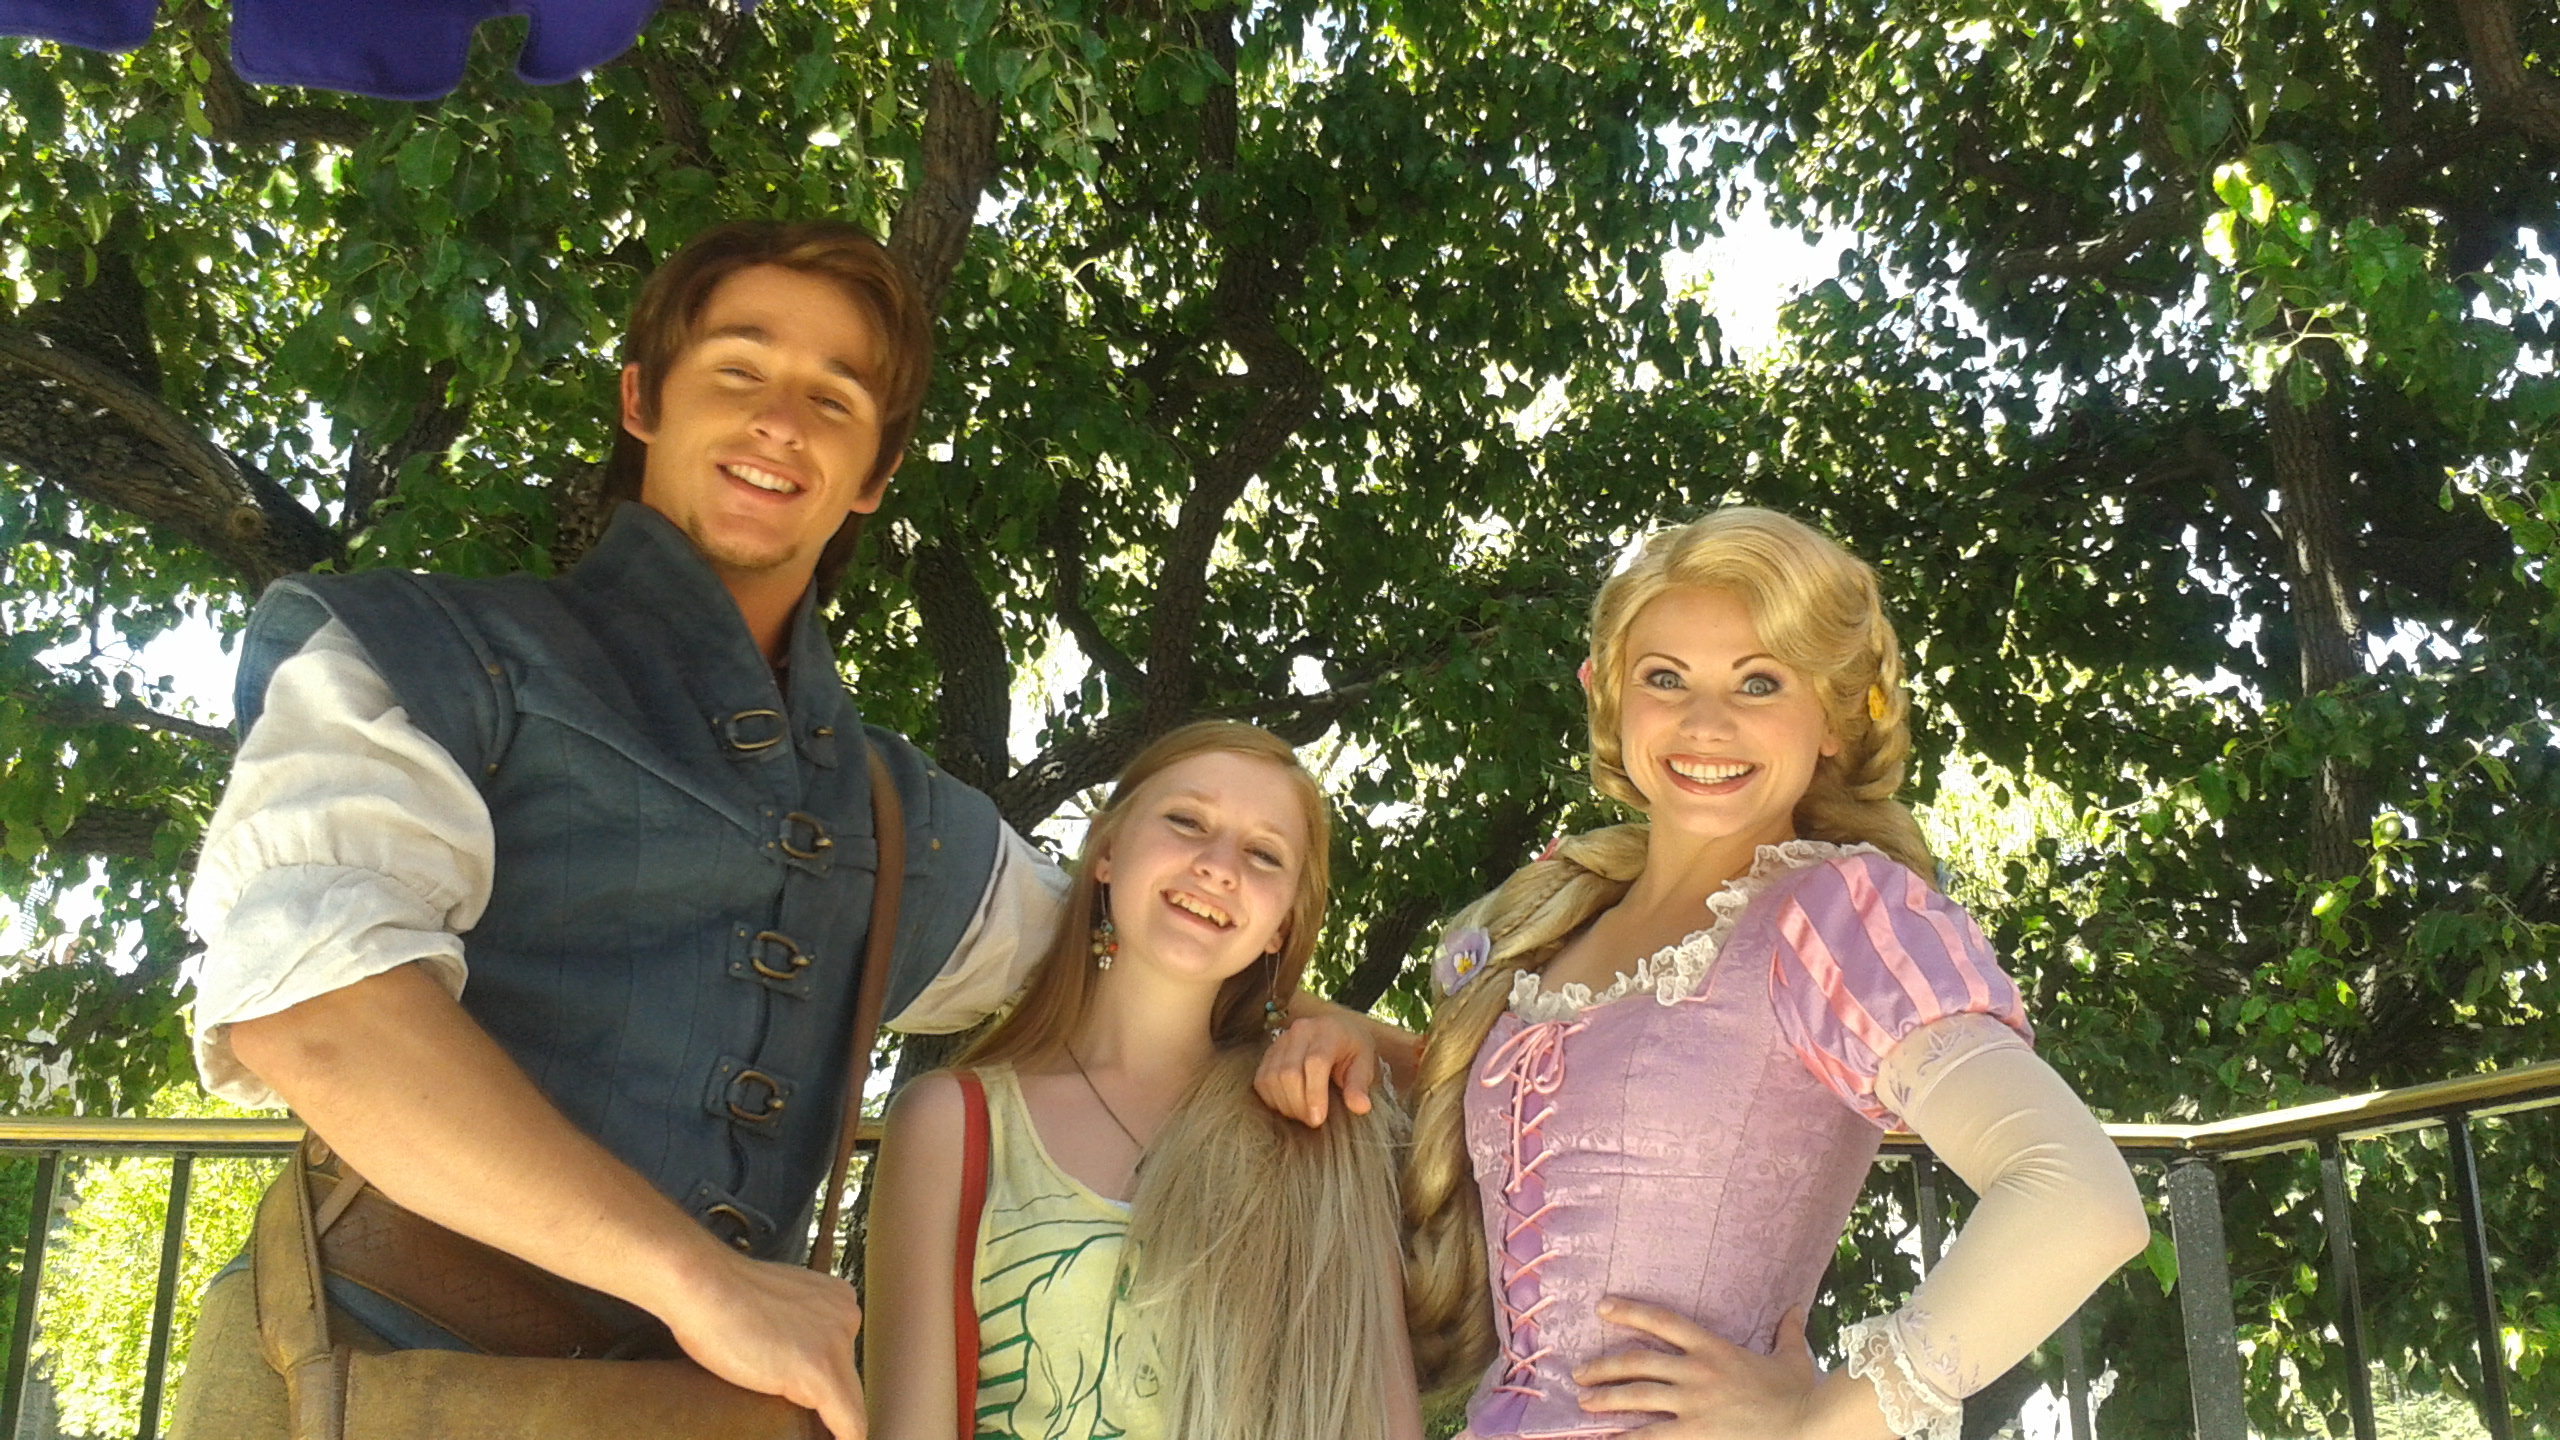 Meet and Greet with Rapunzel and Flynn Rider at Disneyland